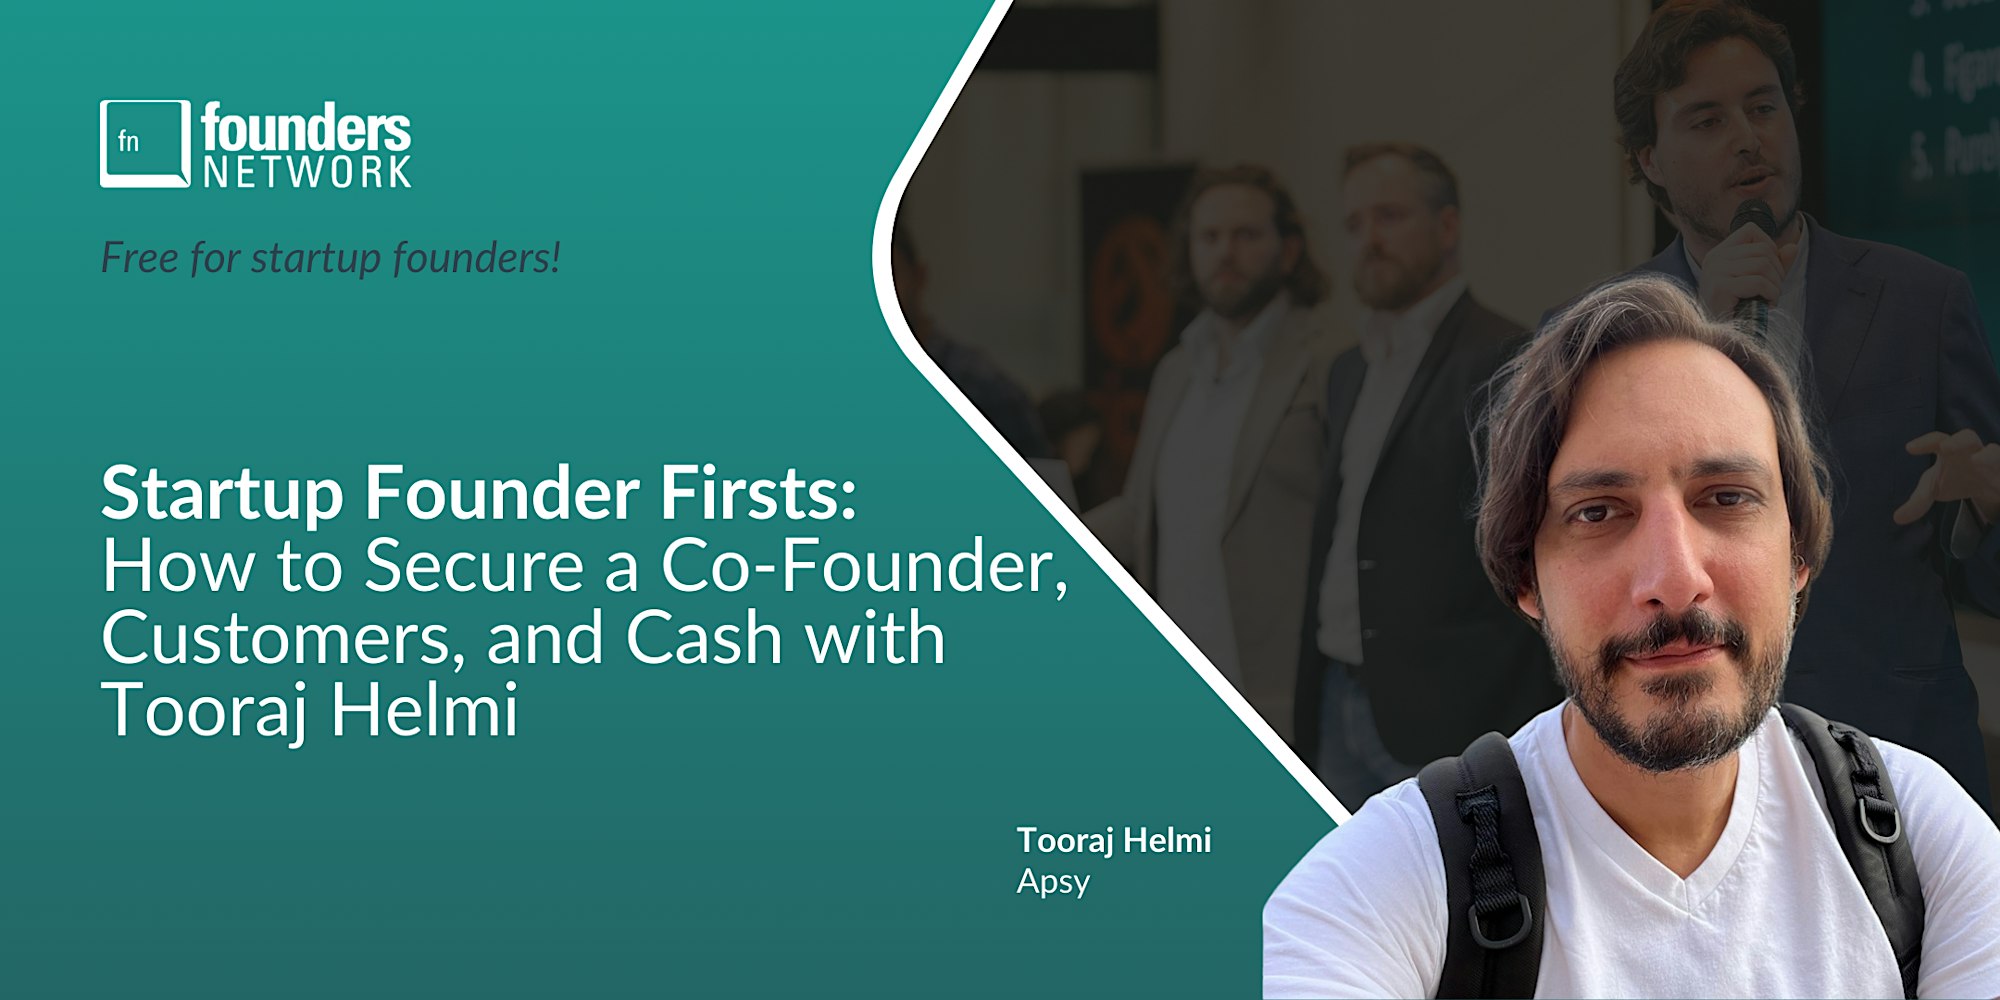 Featured image for “Startup Founder Firsts: How to Secure a Co-Founder, Customers, and Cash”